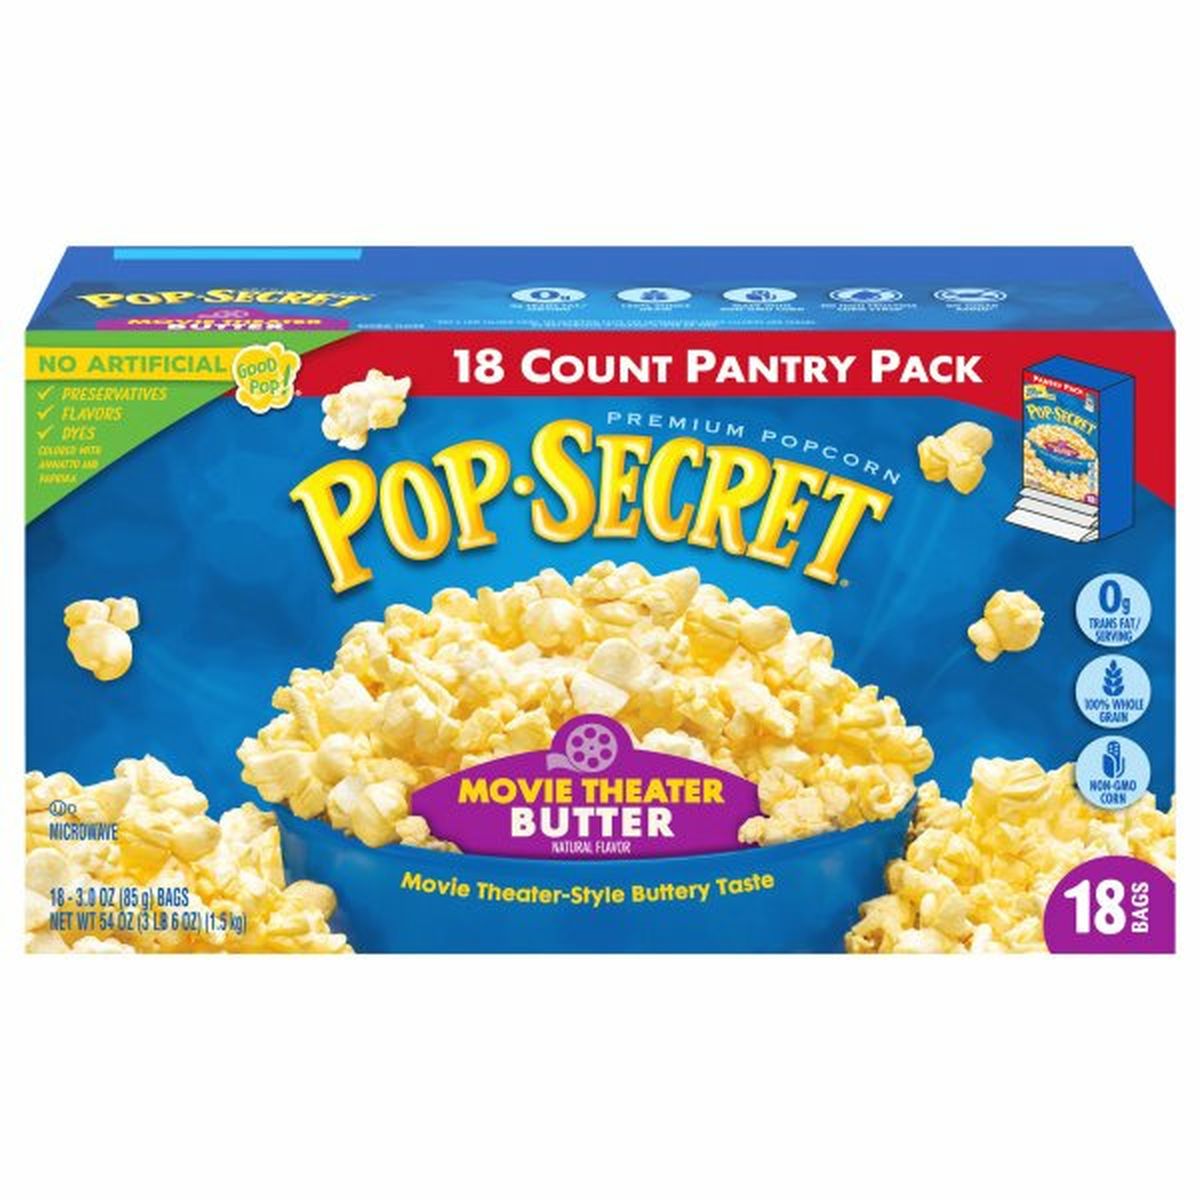 Calories in Pop Secret Popcorn, Premium, Movie Theater Butter, 18 Count Pantry Pack